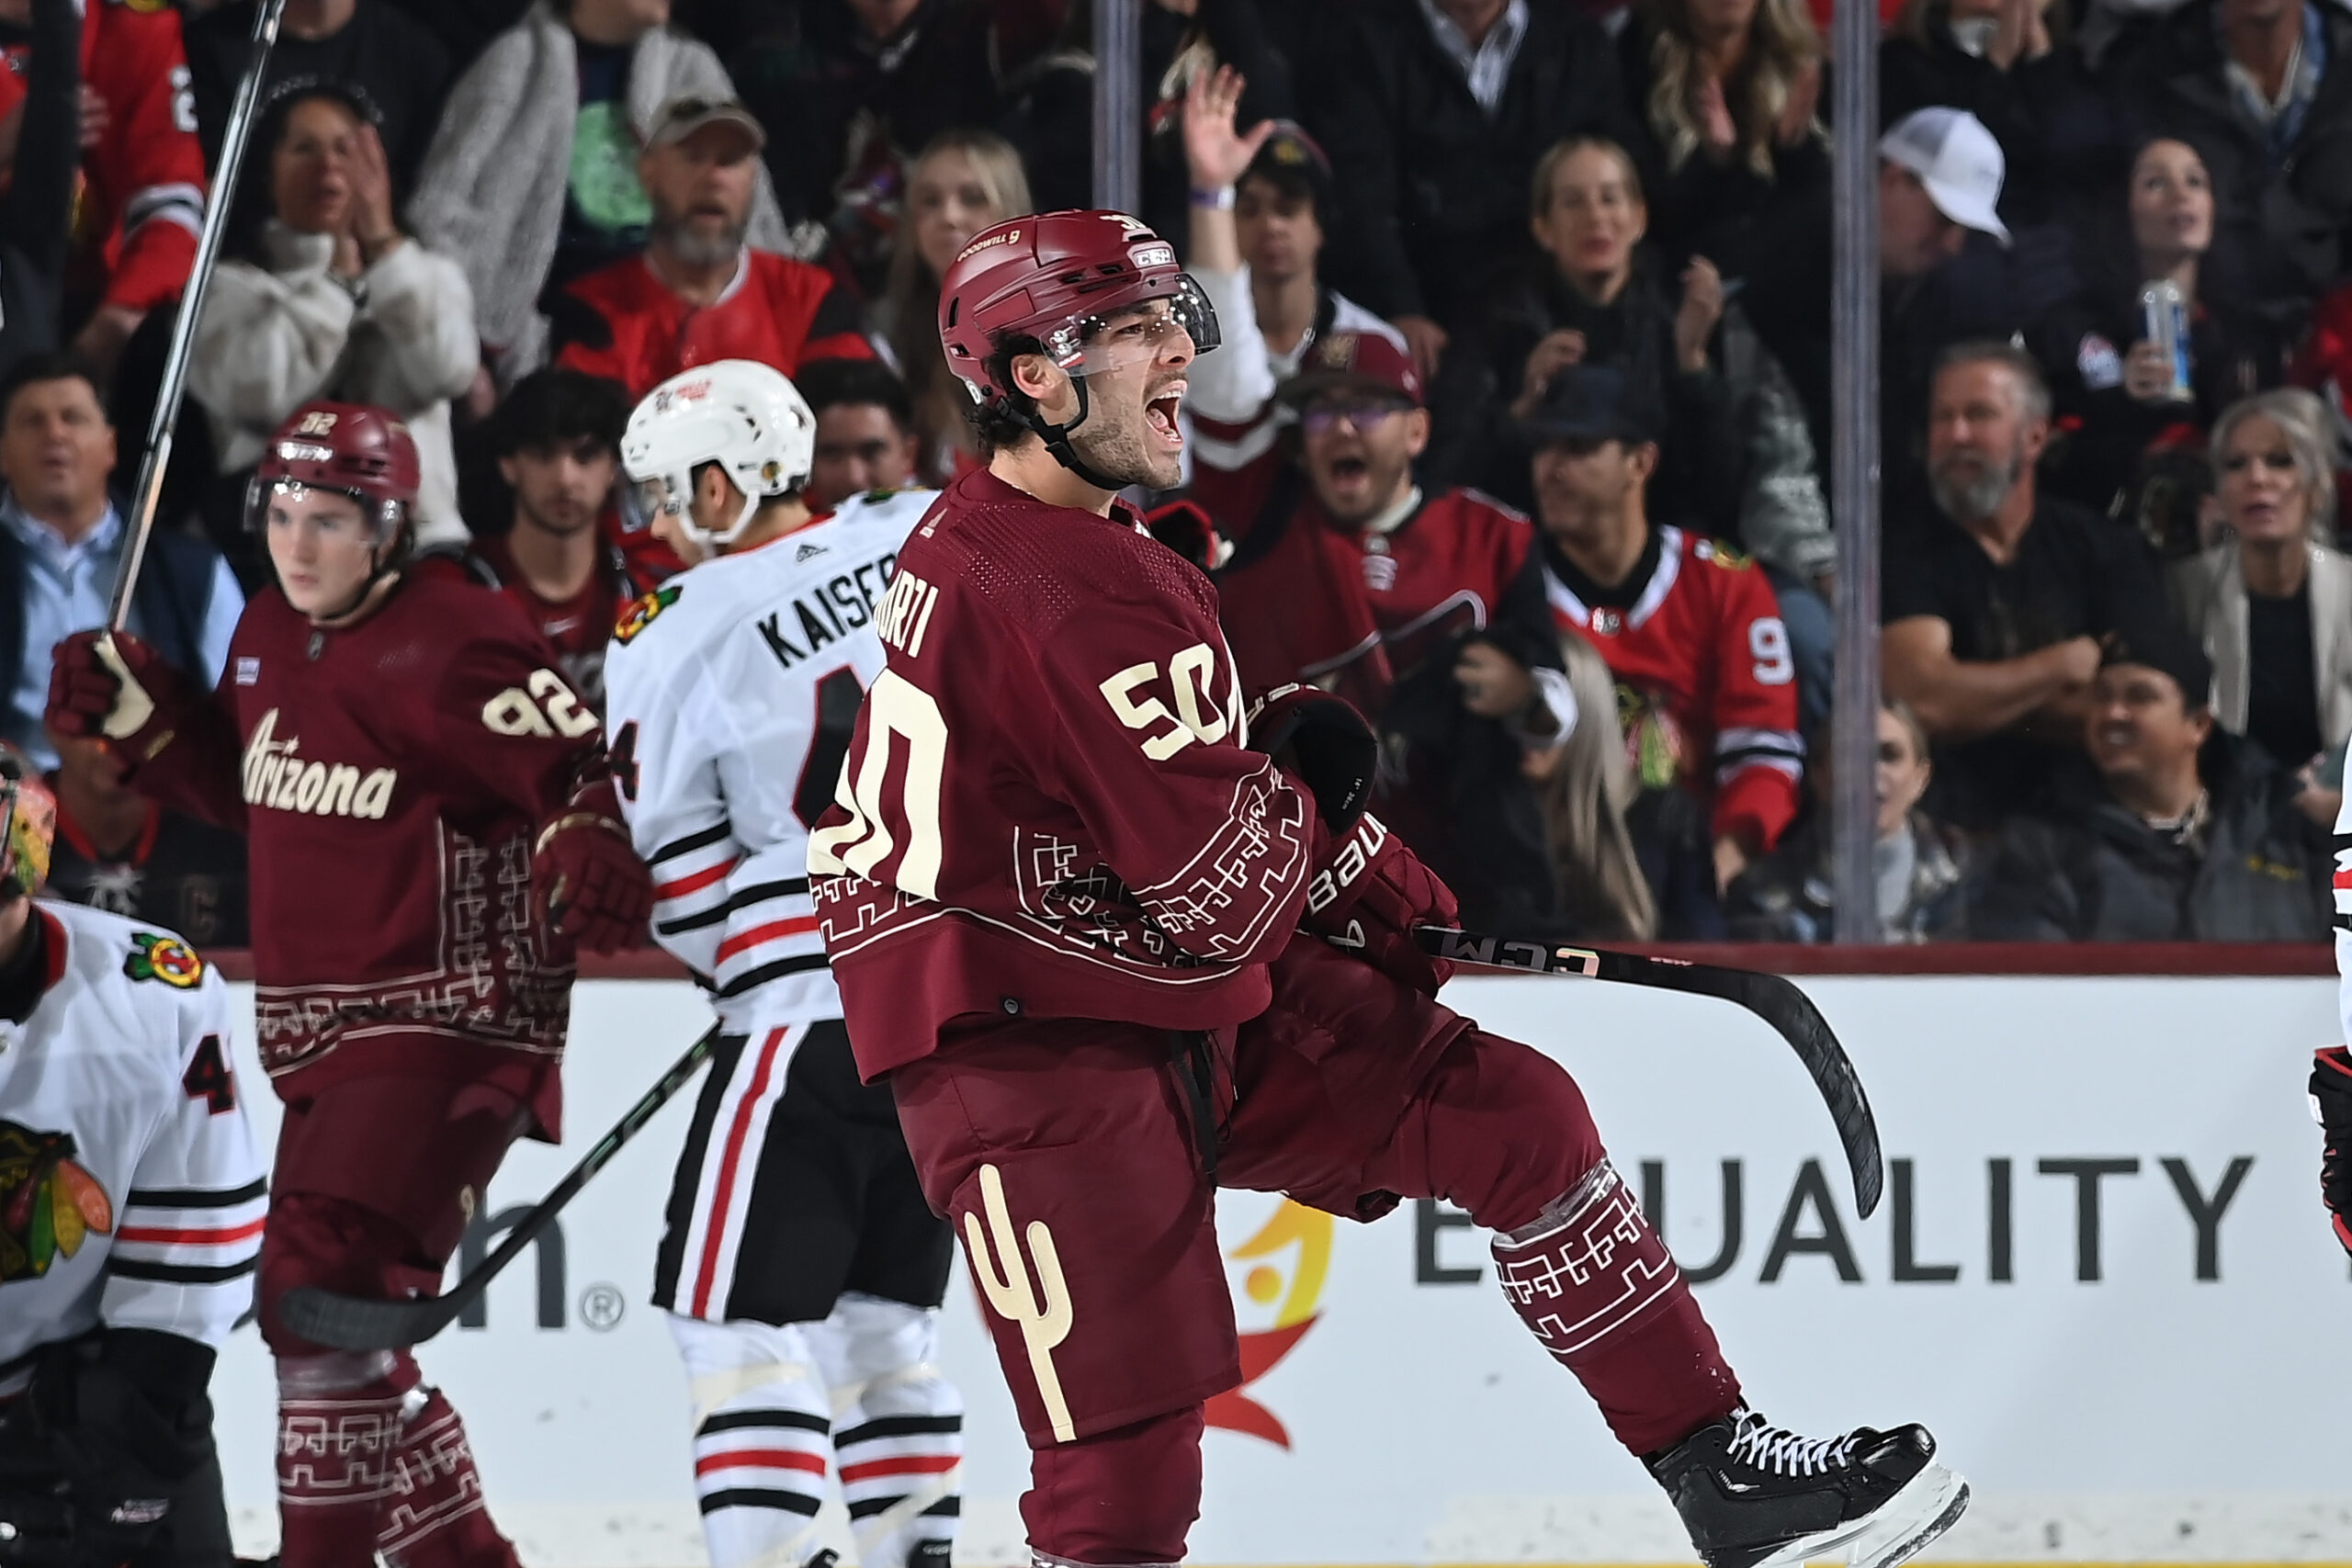 Blackhawks give up 8 unanswered goals in loss to Coyotes